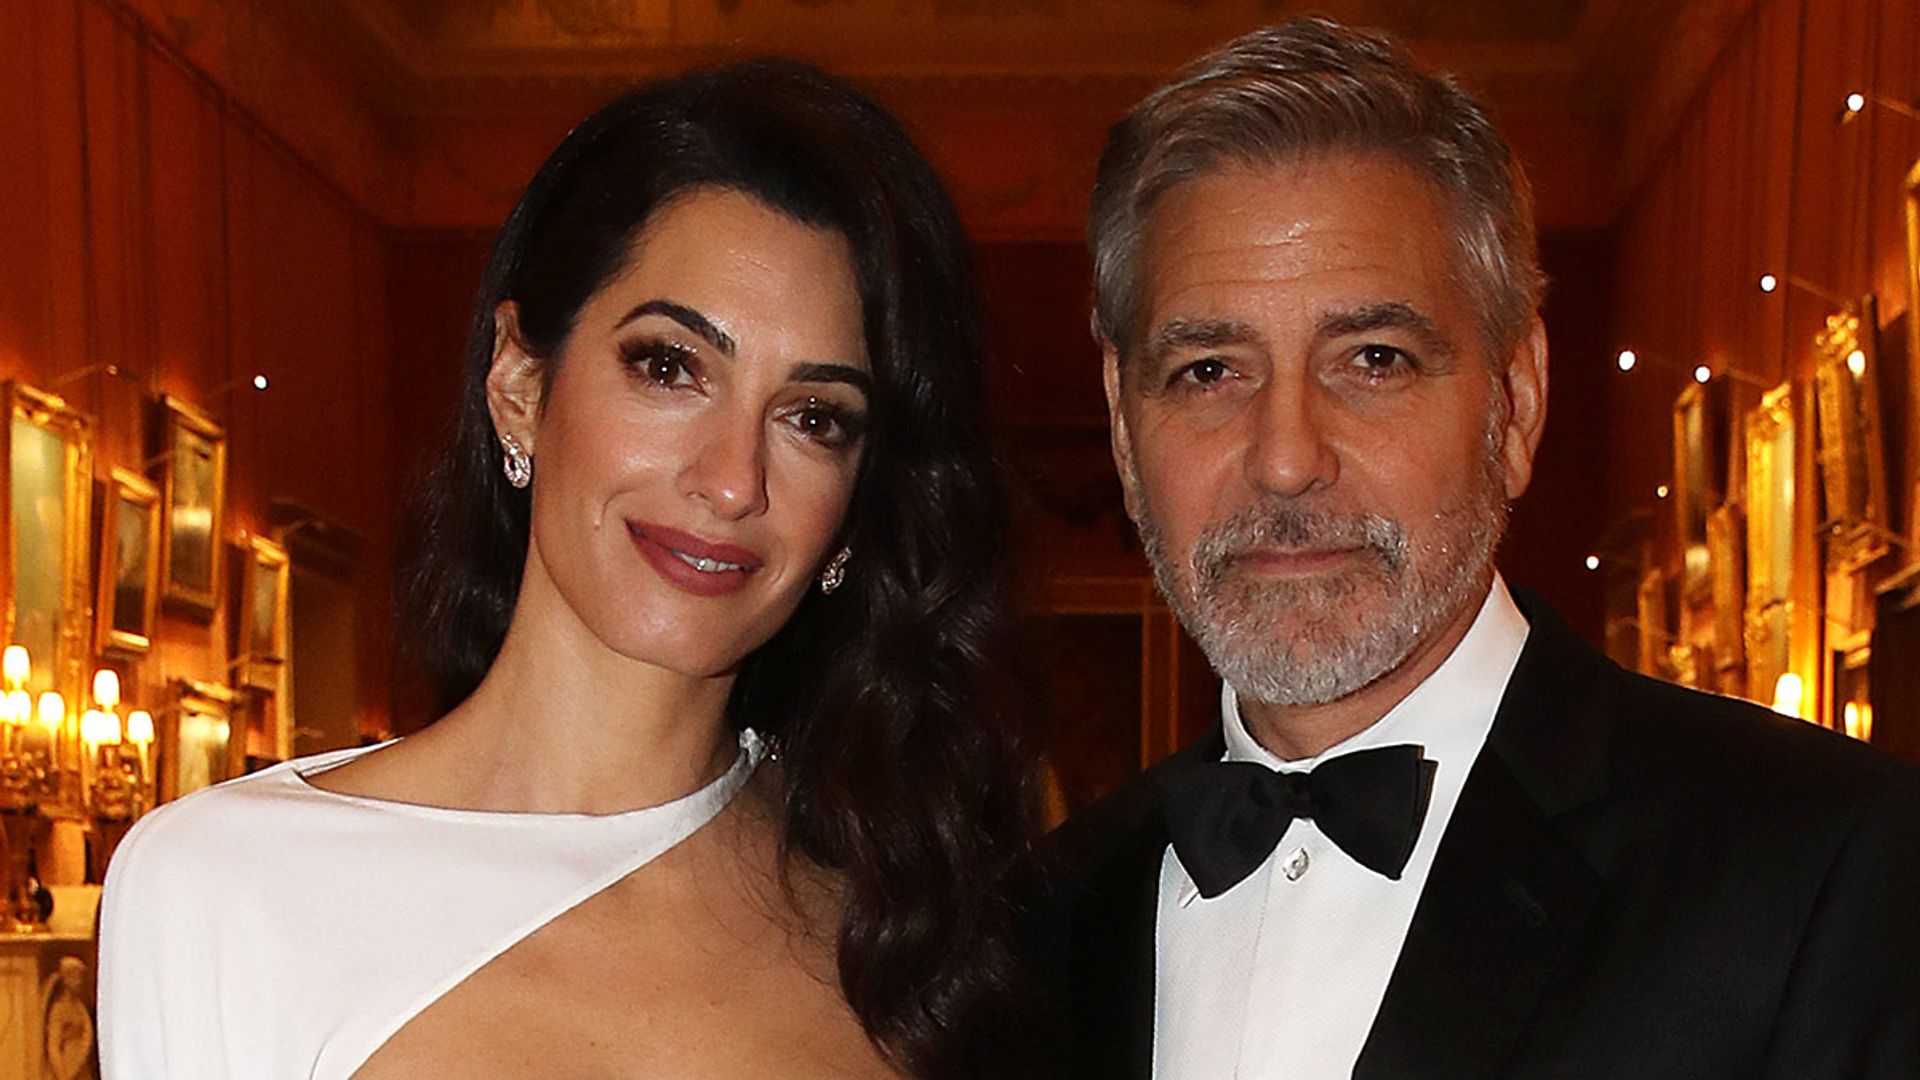 Amal Clooney dazzles in amazing vintage couture gown at Buckingham Palace